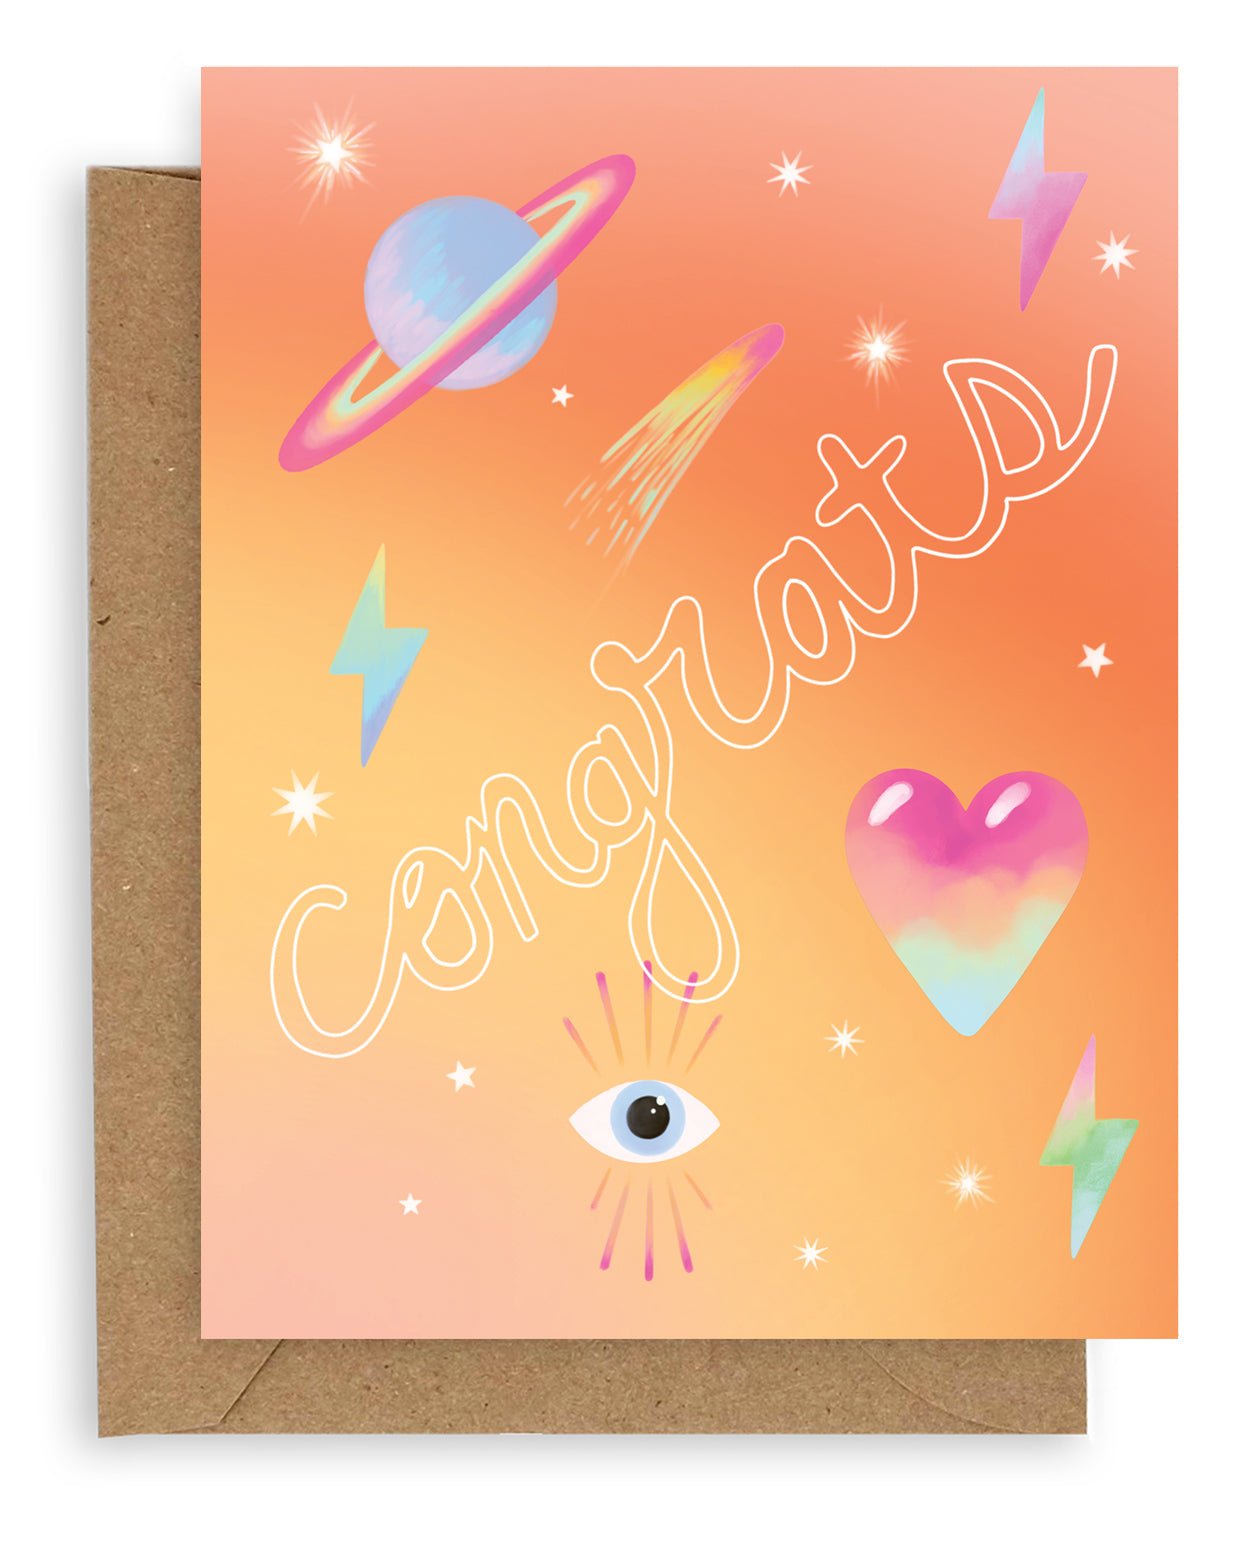 Greeting card with the word "Congrats" across the front in white hollow font with neon icons against an ombre orange background. Shown with brown kraft paper envelope.